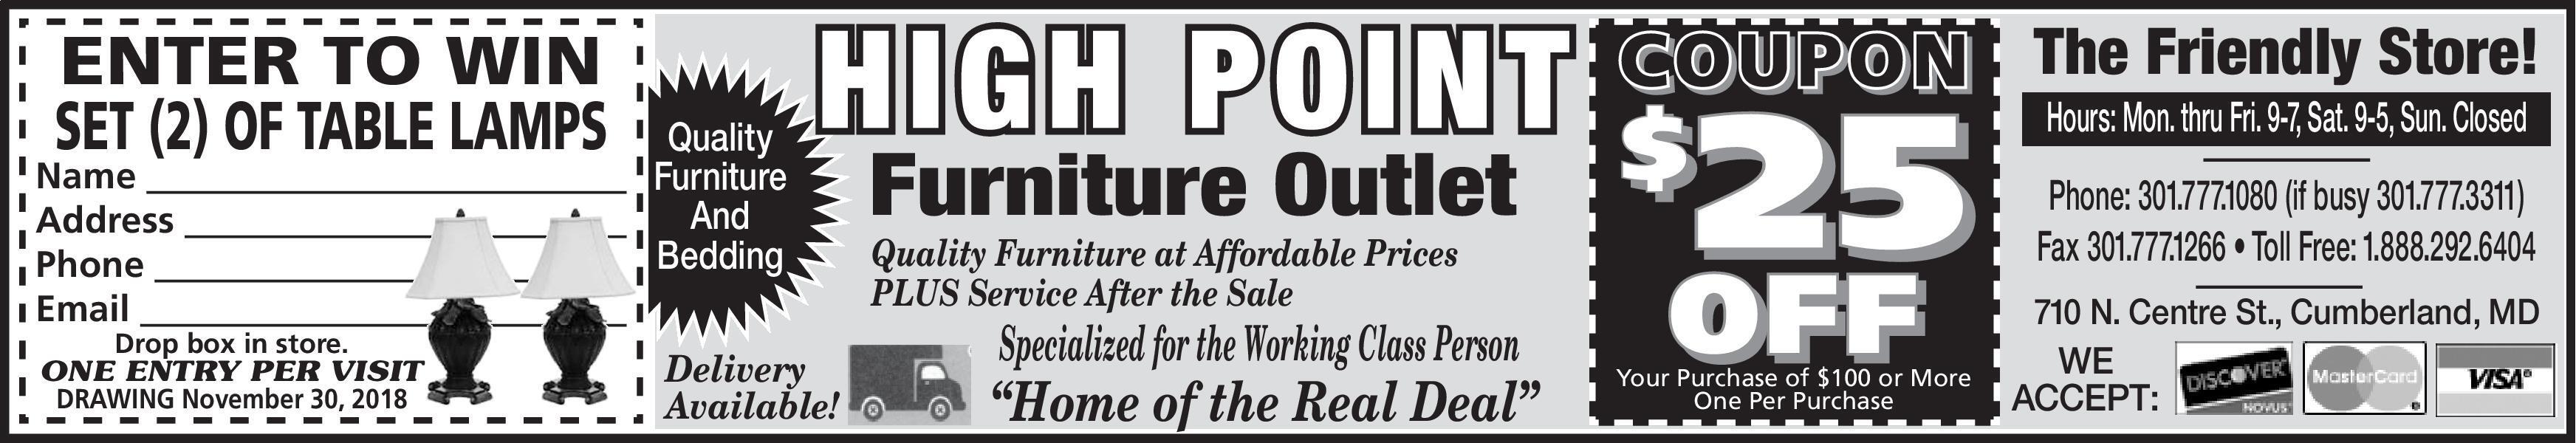 High Point Furniture Outlet